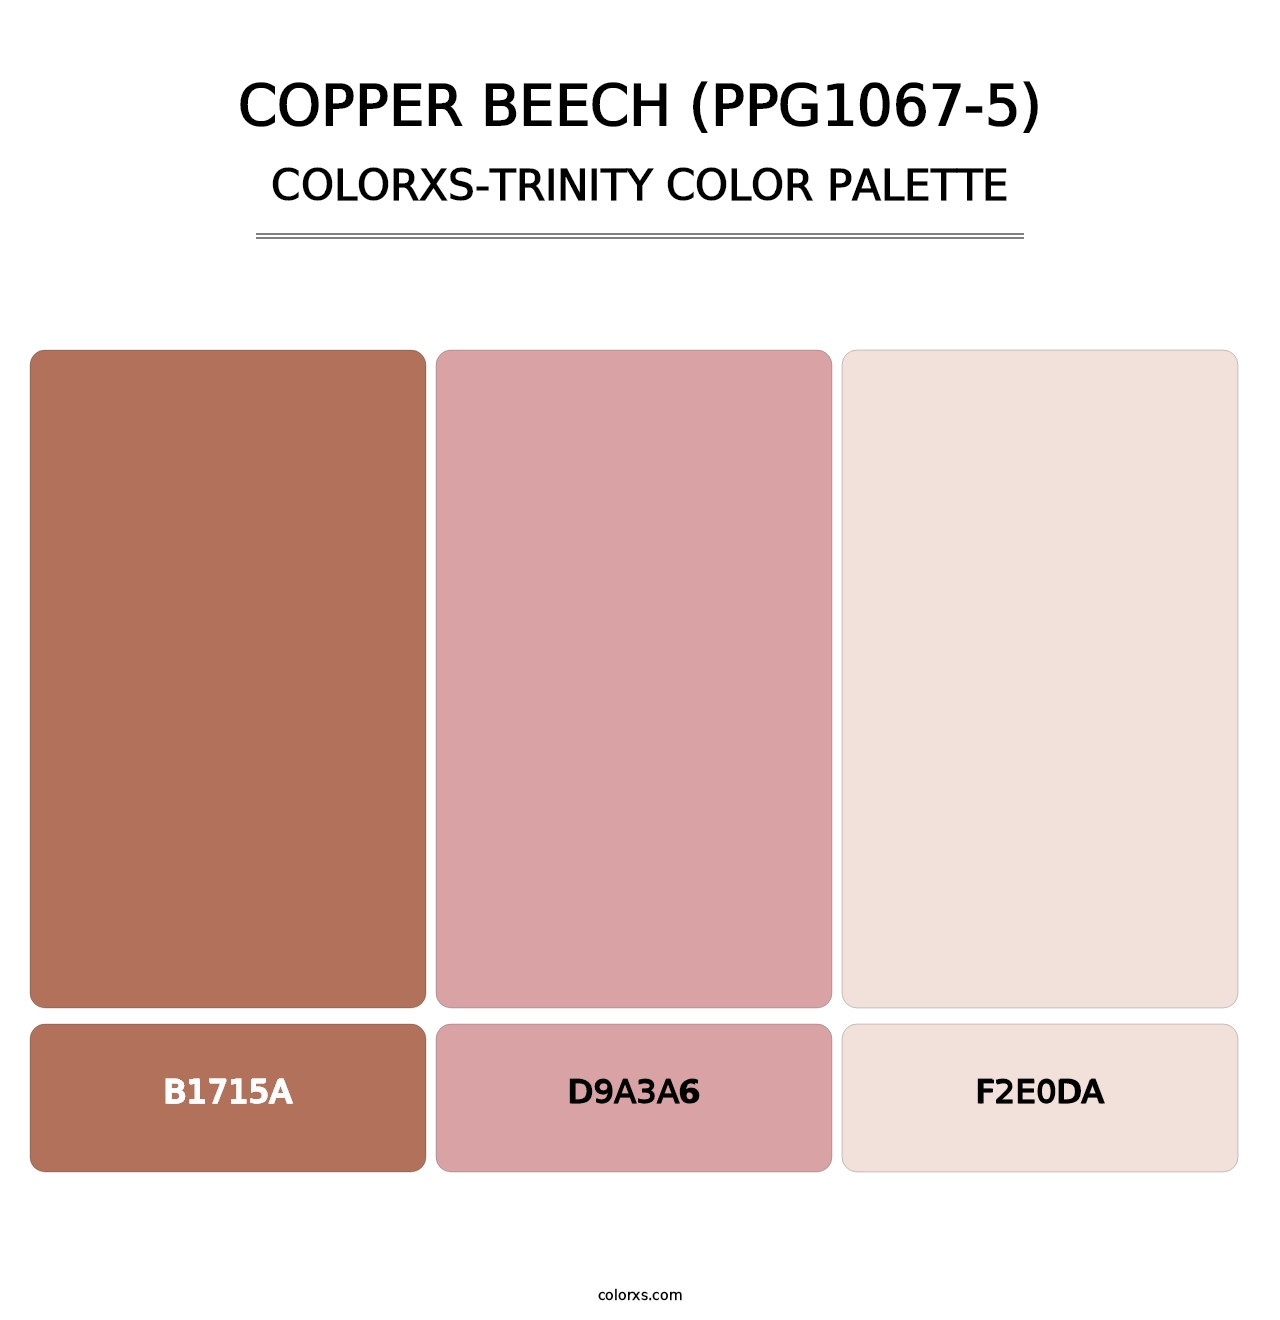 Copper Beech (PPG1067-5) - Colorxs Trinity Palette